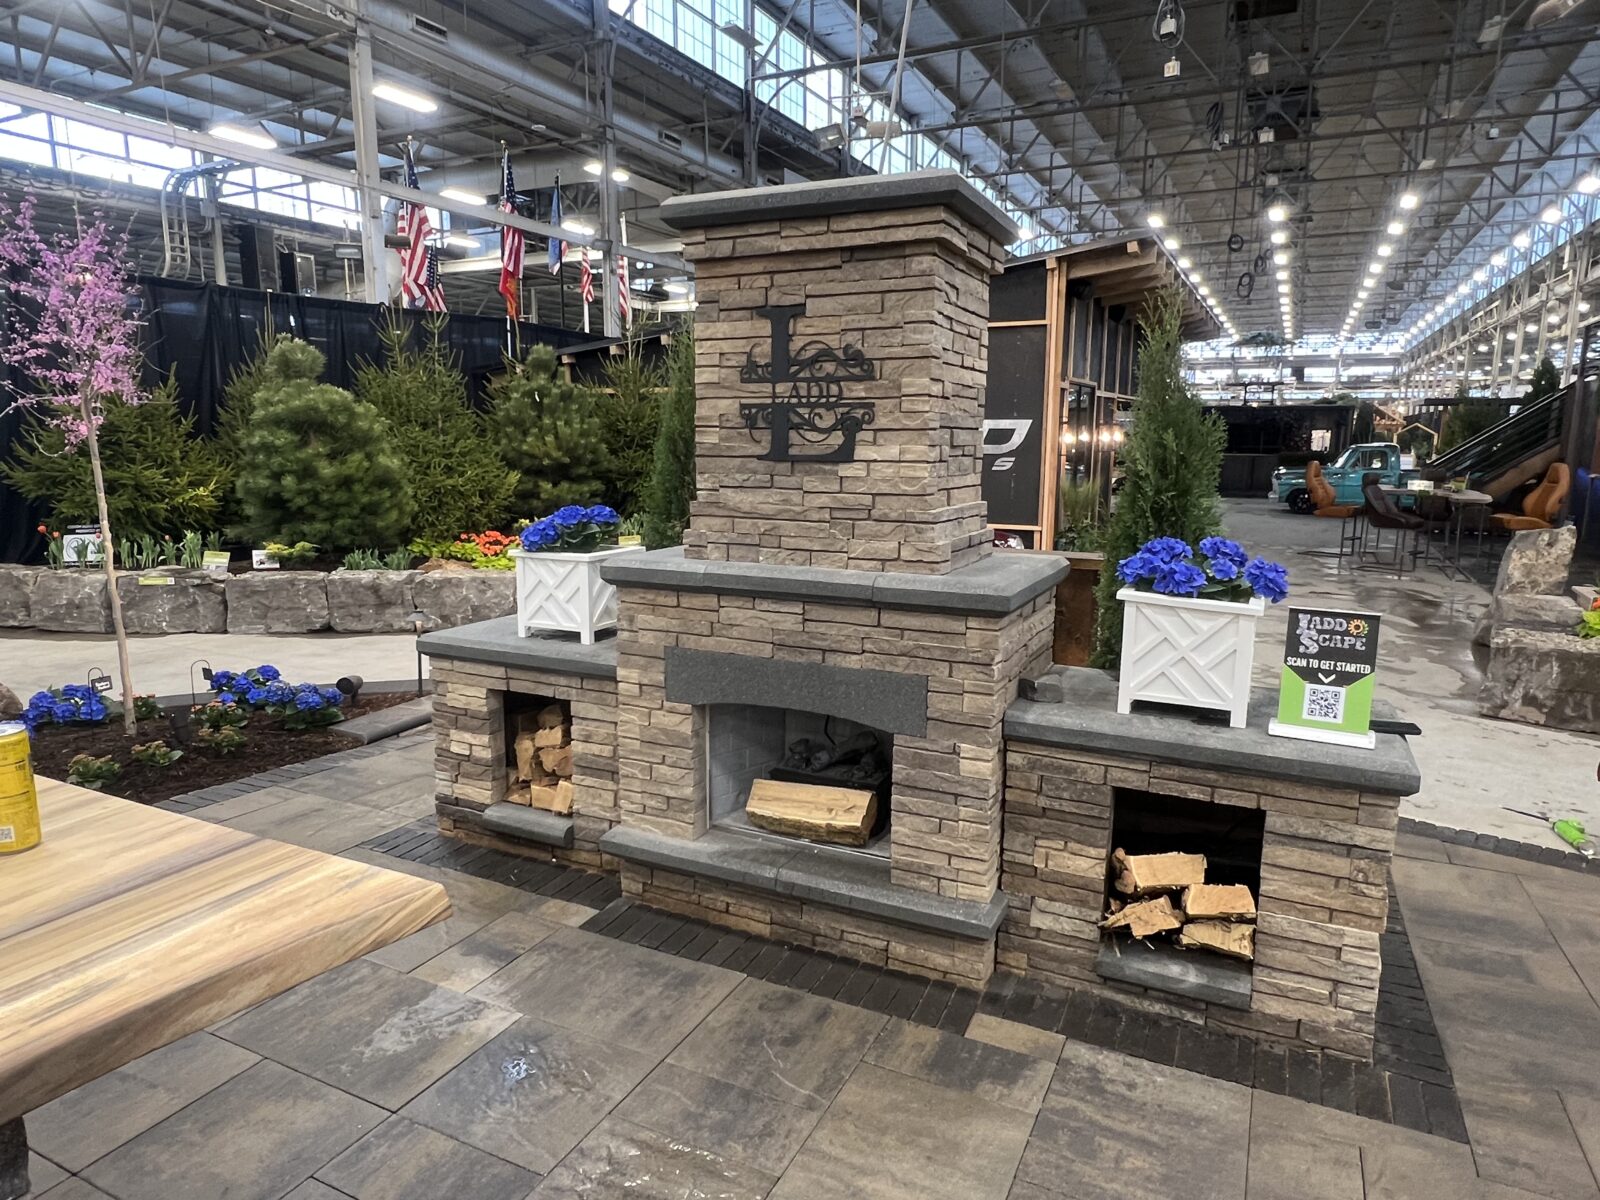 A unique fireplace display designed by Ladd Scape for the 2023 Indianapolis Home and Garden Show, featuring the company logo